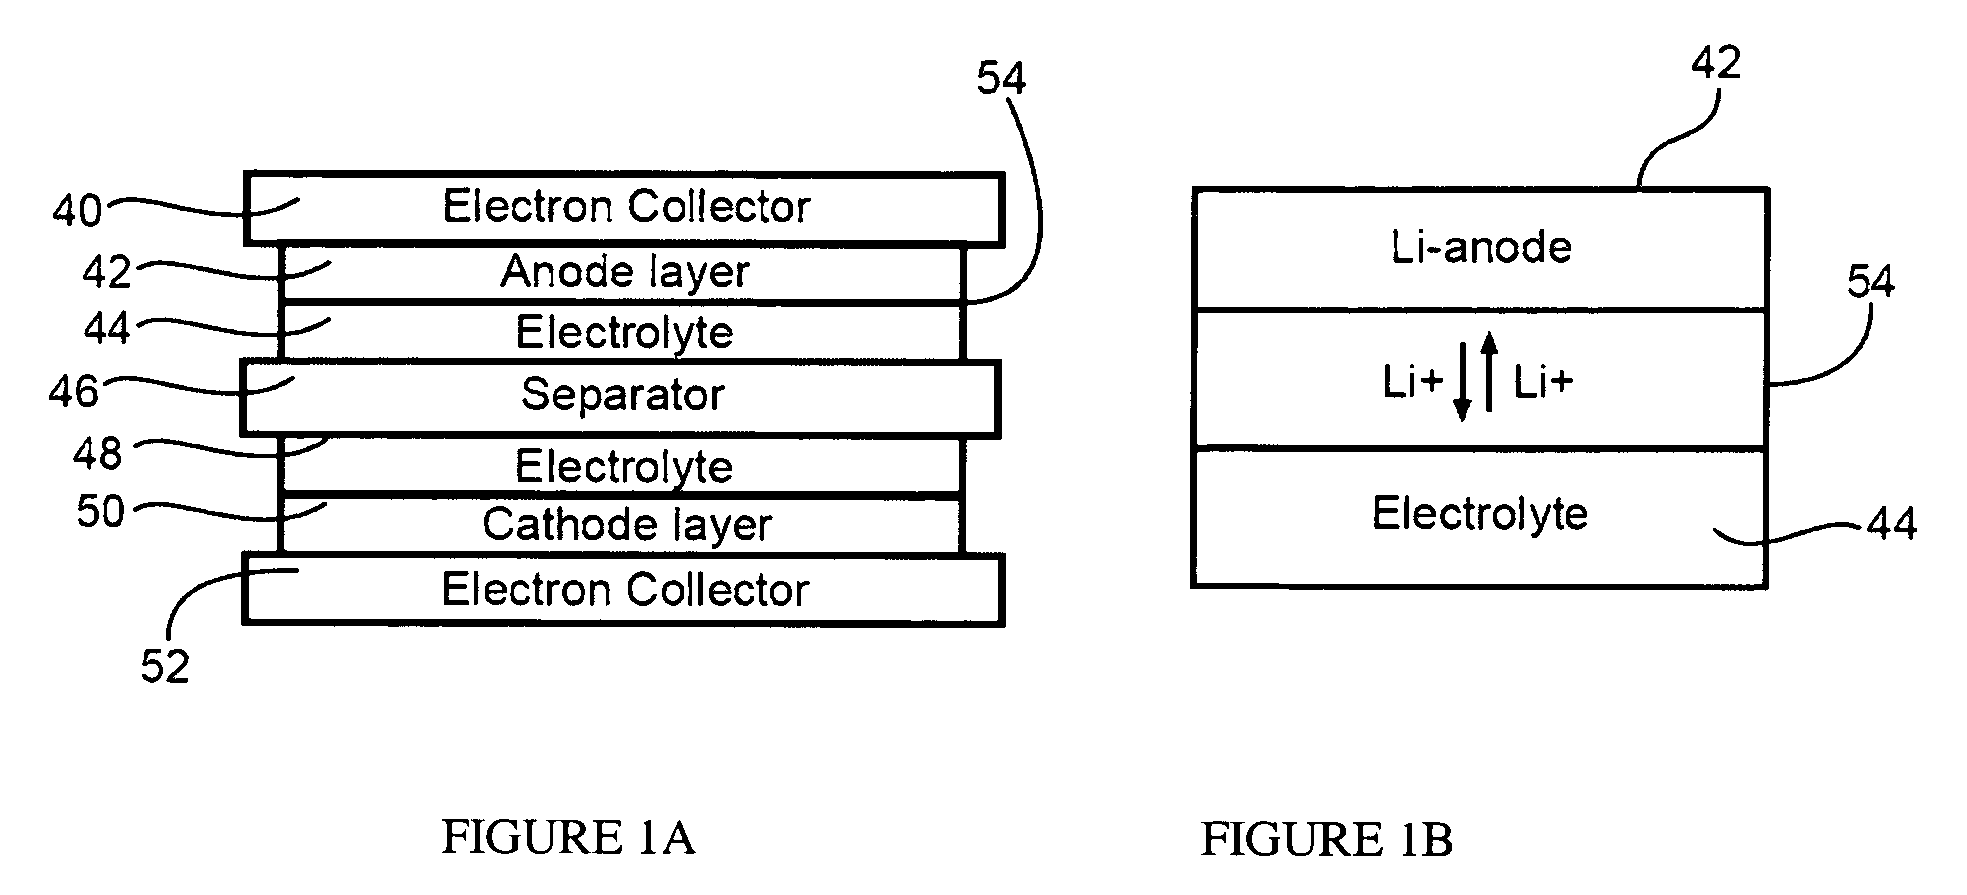 Battery with molten salt electrolyte and protected lithium-based negative electrode material